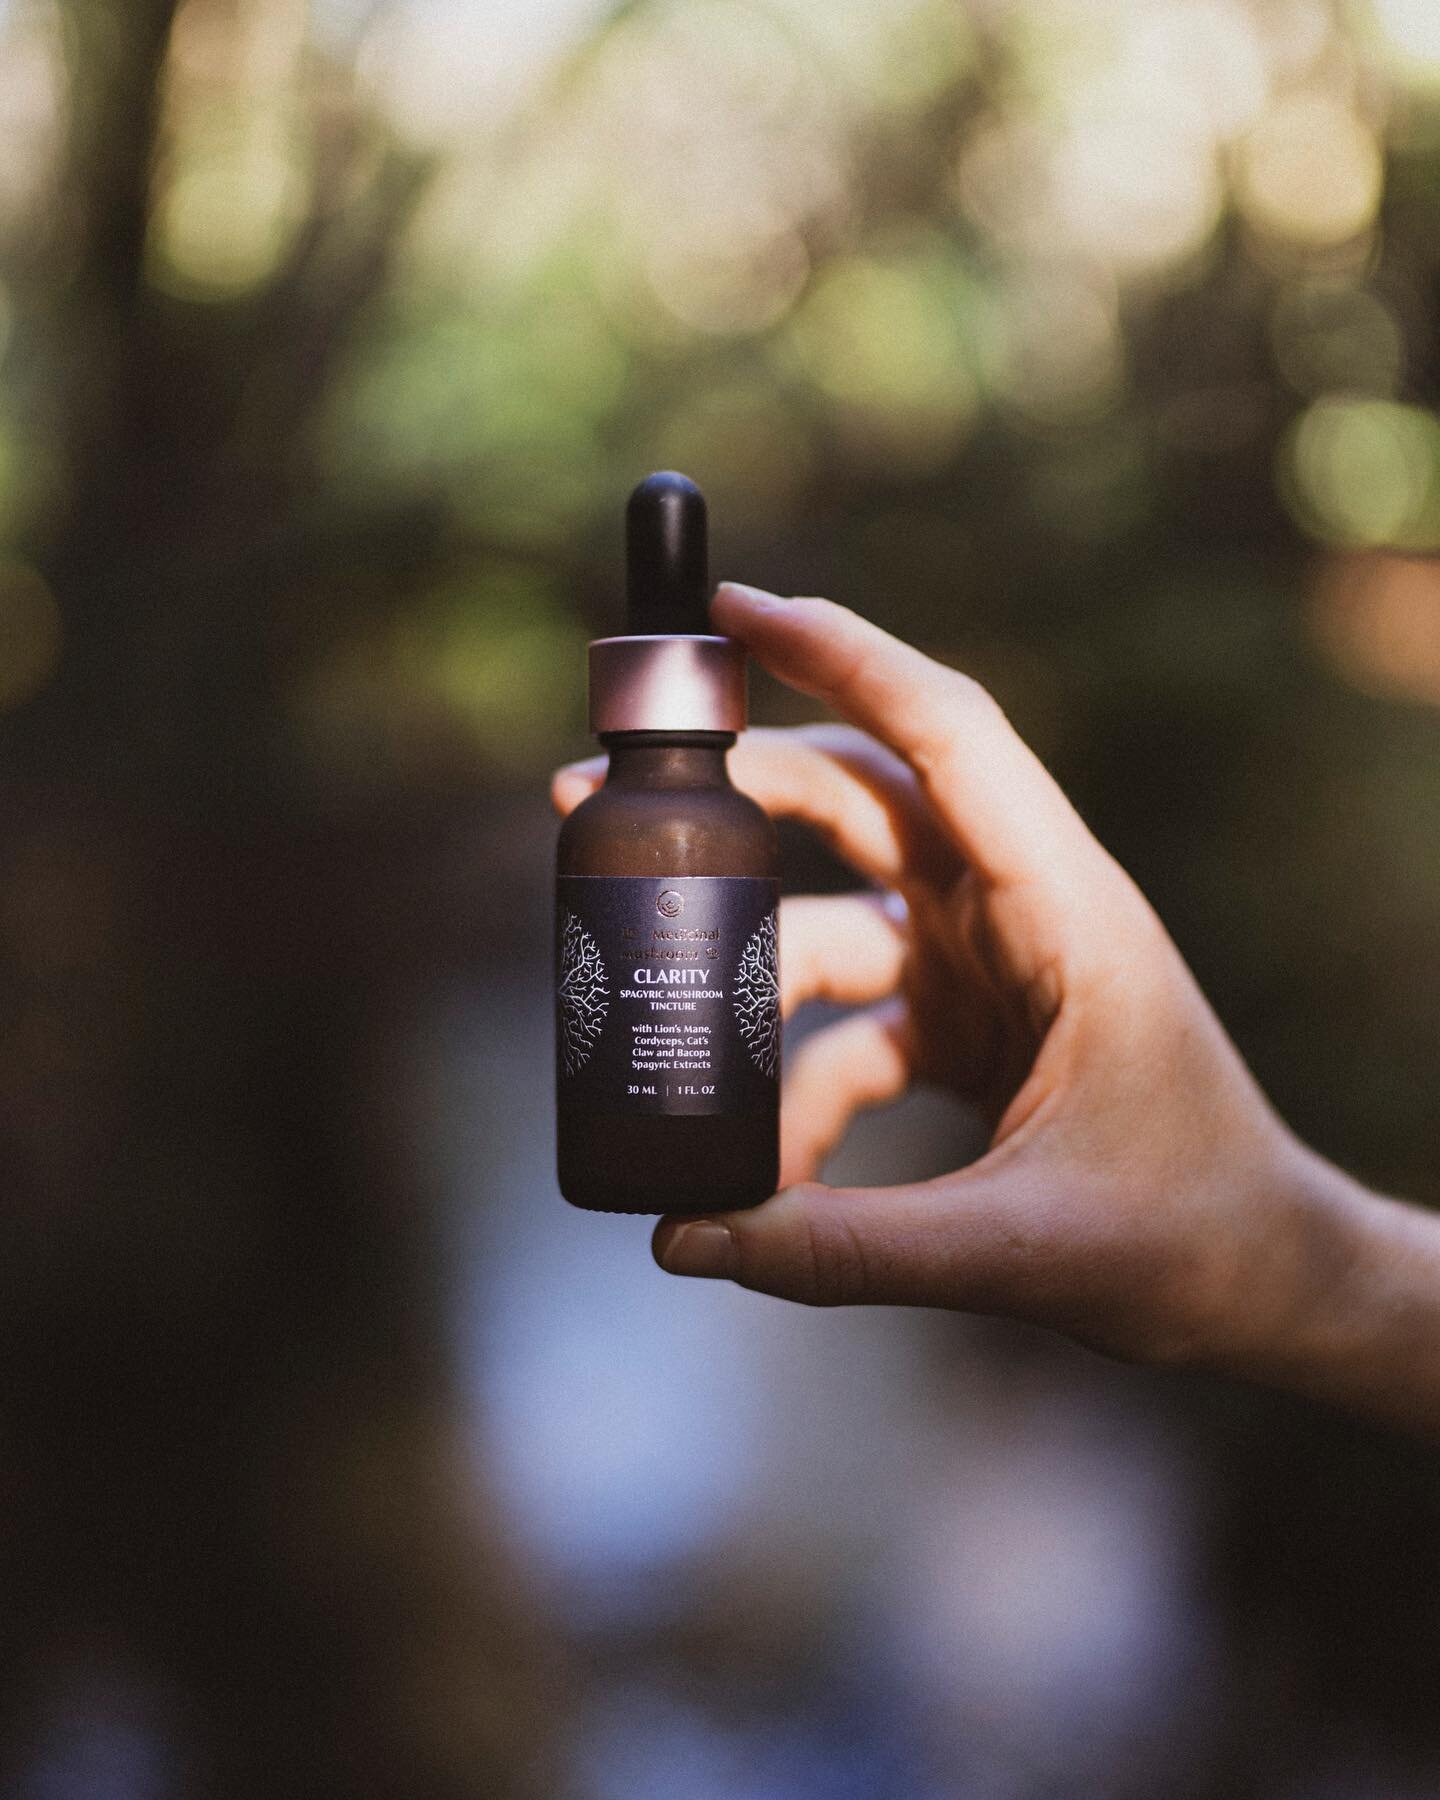 Loved playing with the dappled light peeking through the trees on this outdoor product shoot for @medicinalmushroomco 🌿
~
Any chance to take the studio outside - we&rsquo;re all for it! 
~
We would love to use this down time to get creative with our